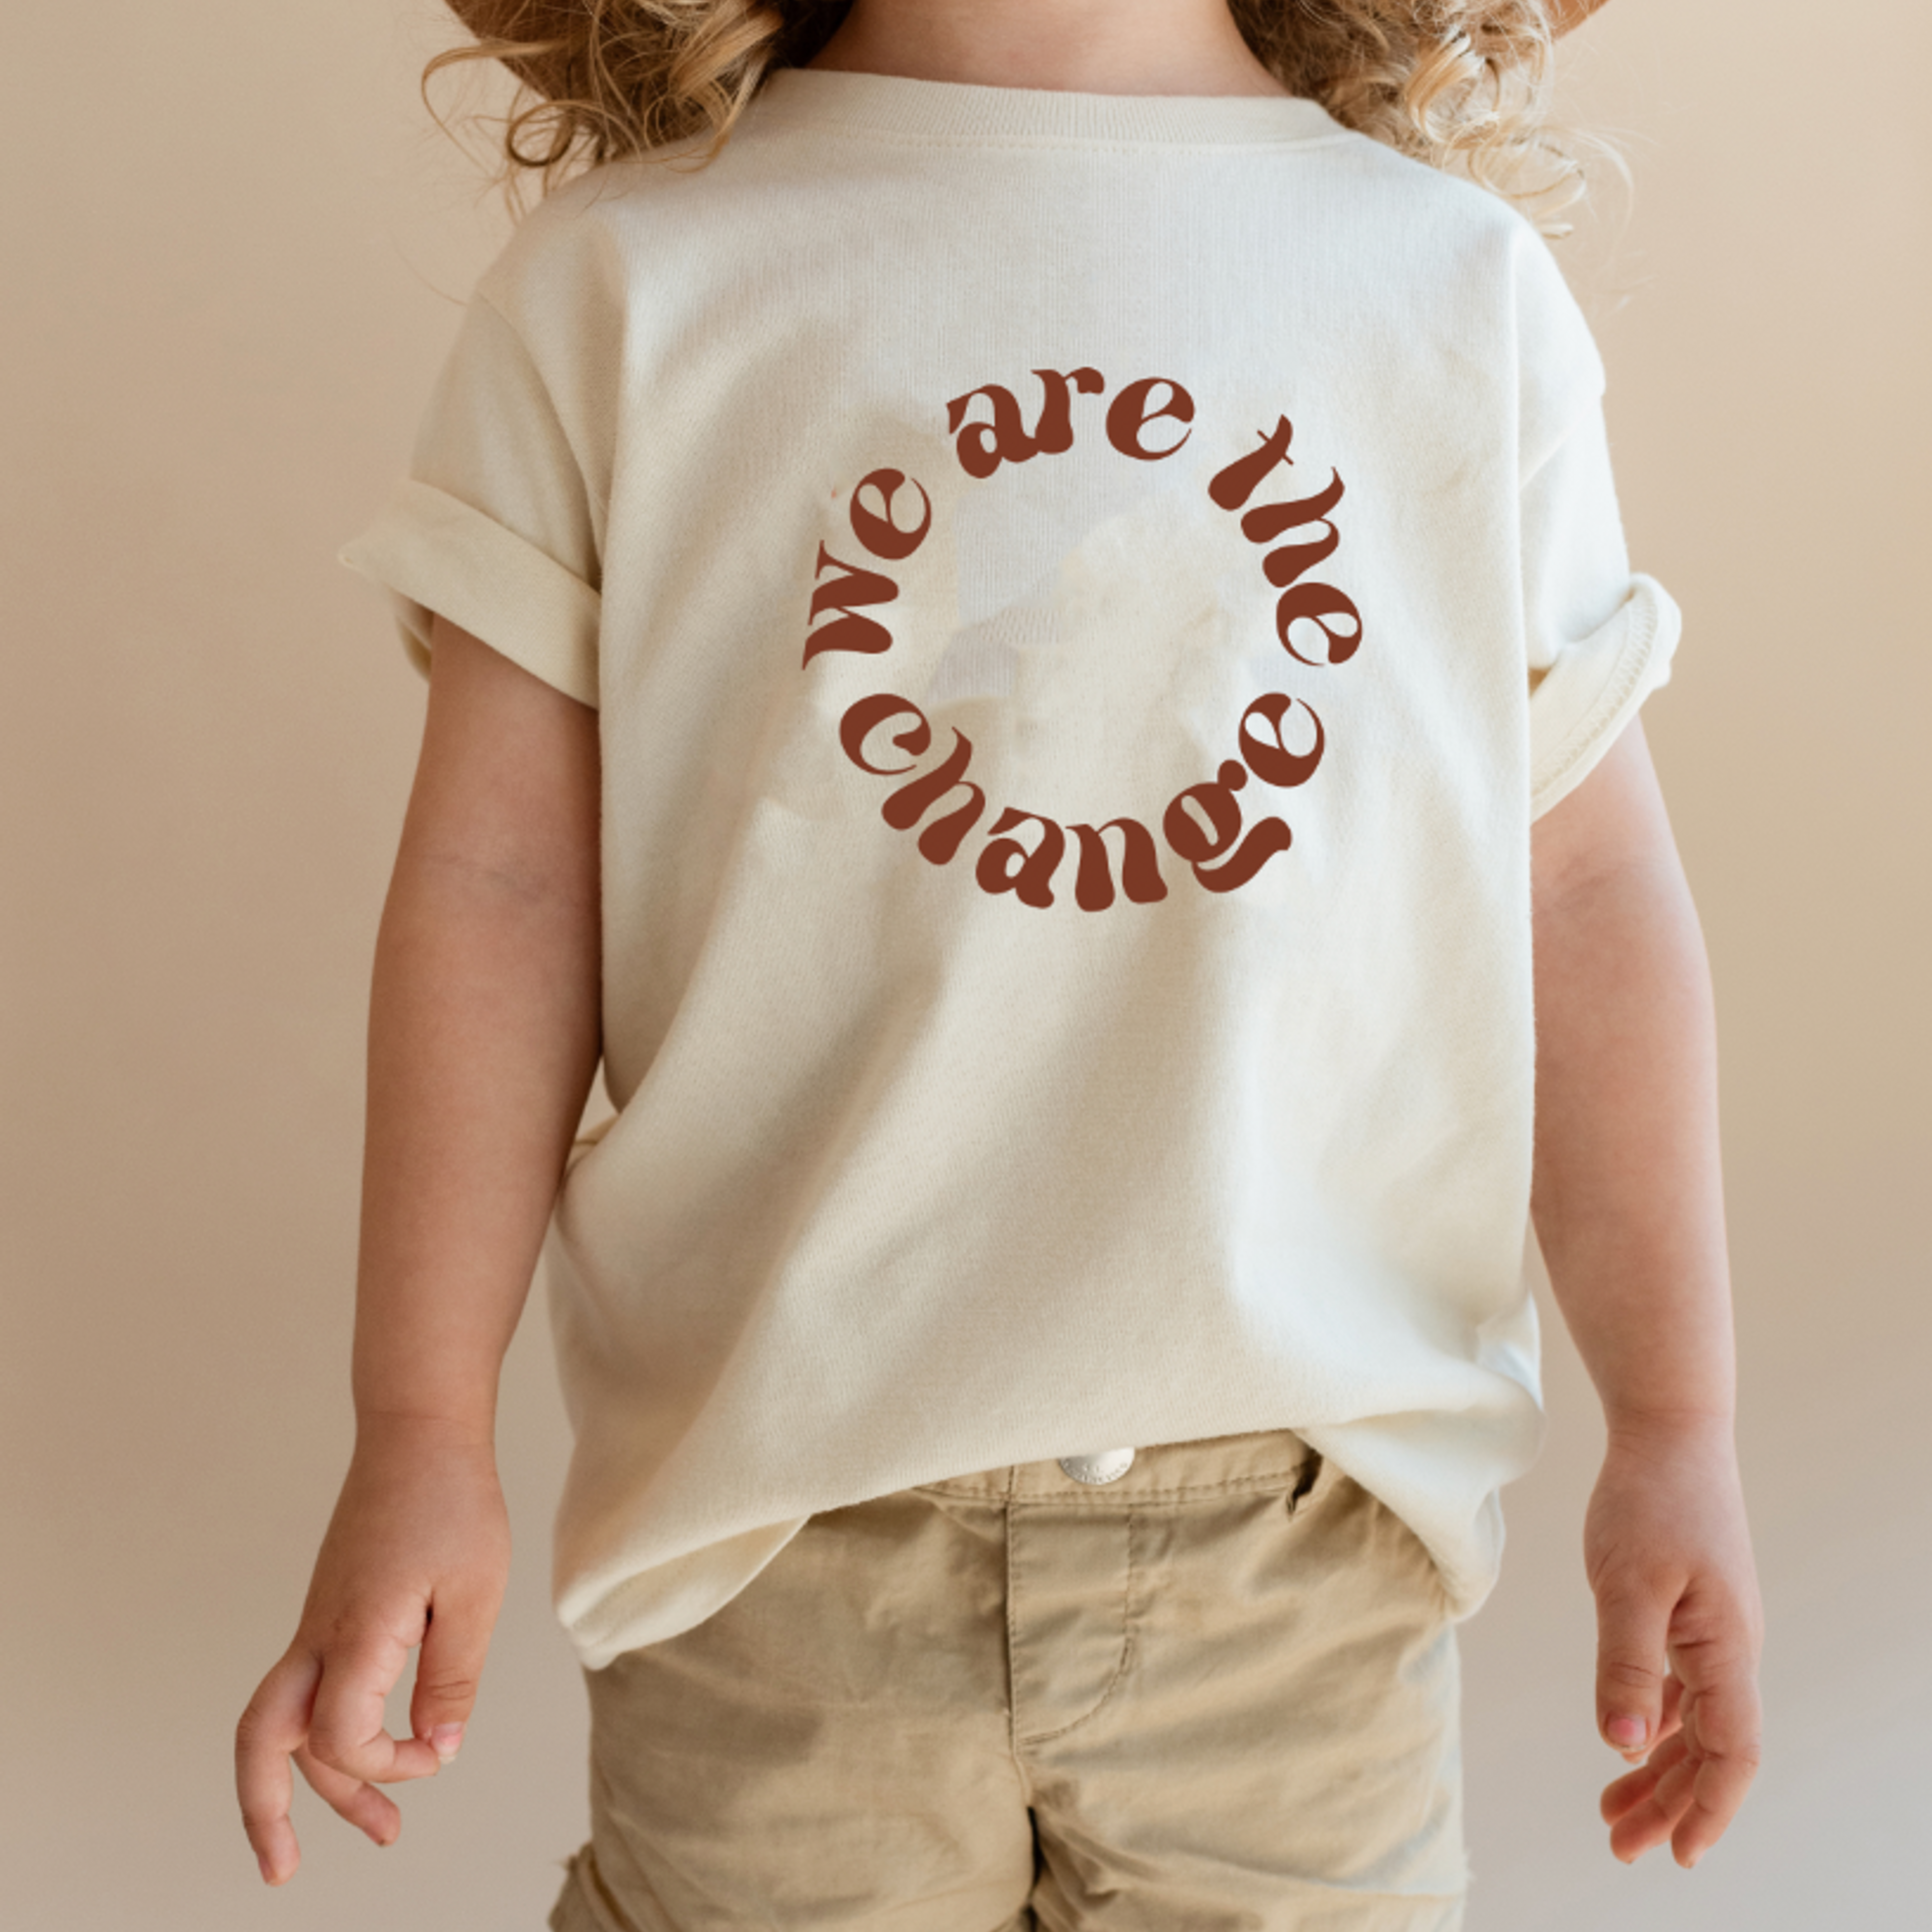 We Are The Change Kid’s Graphic T-Shirt